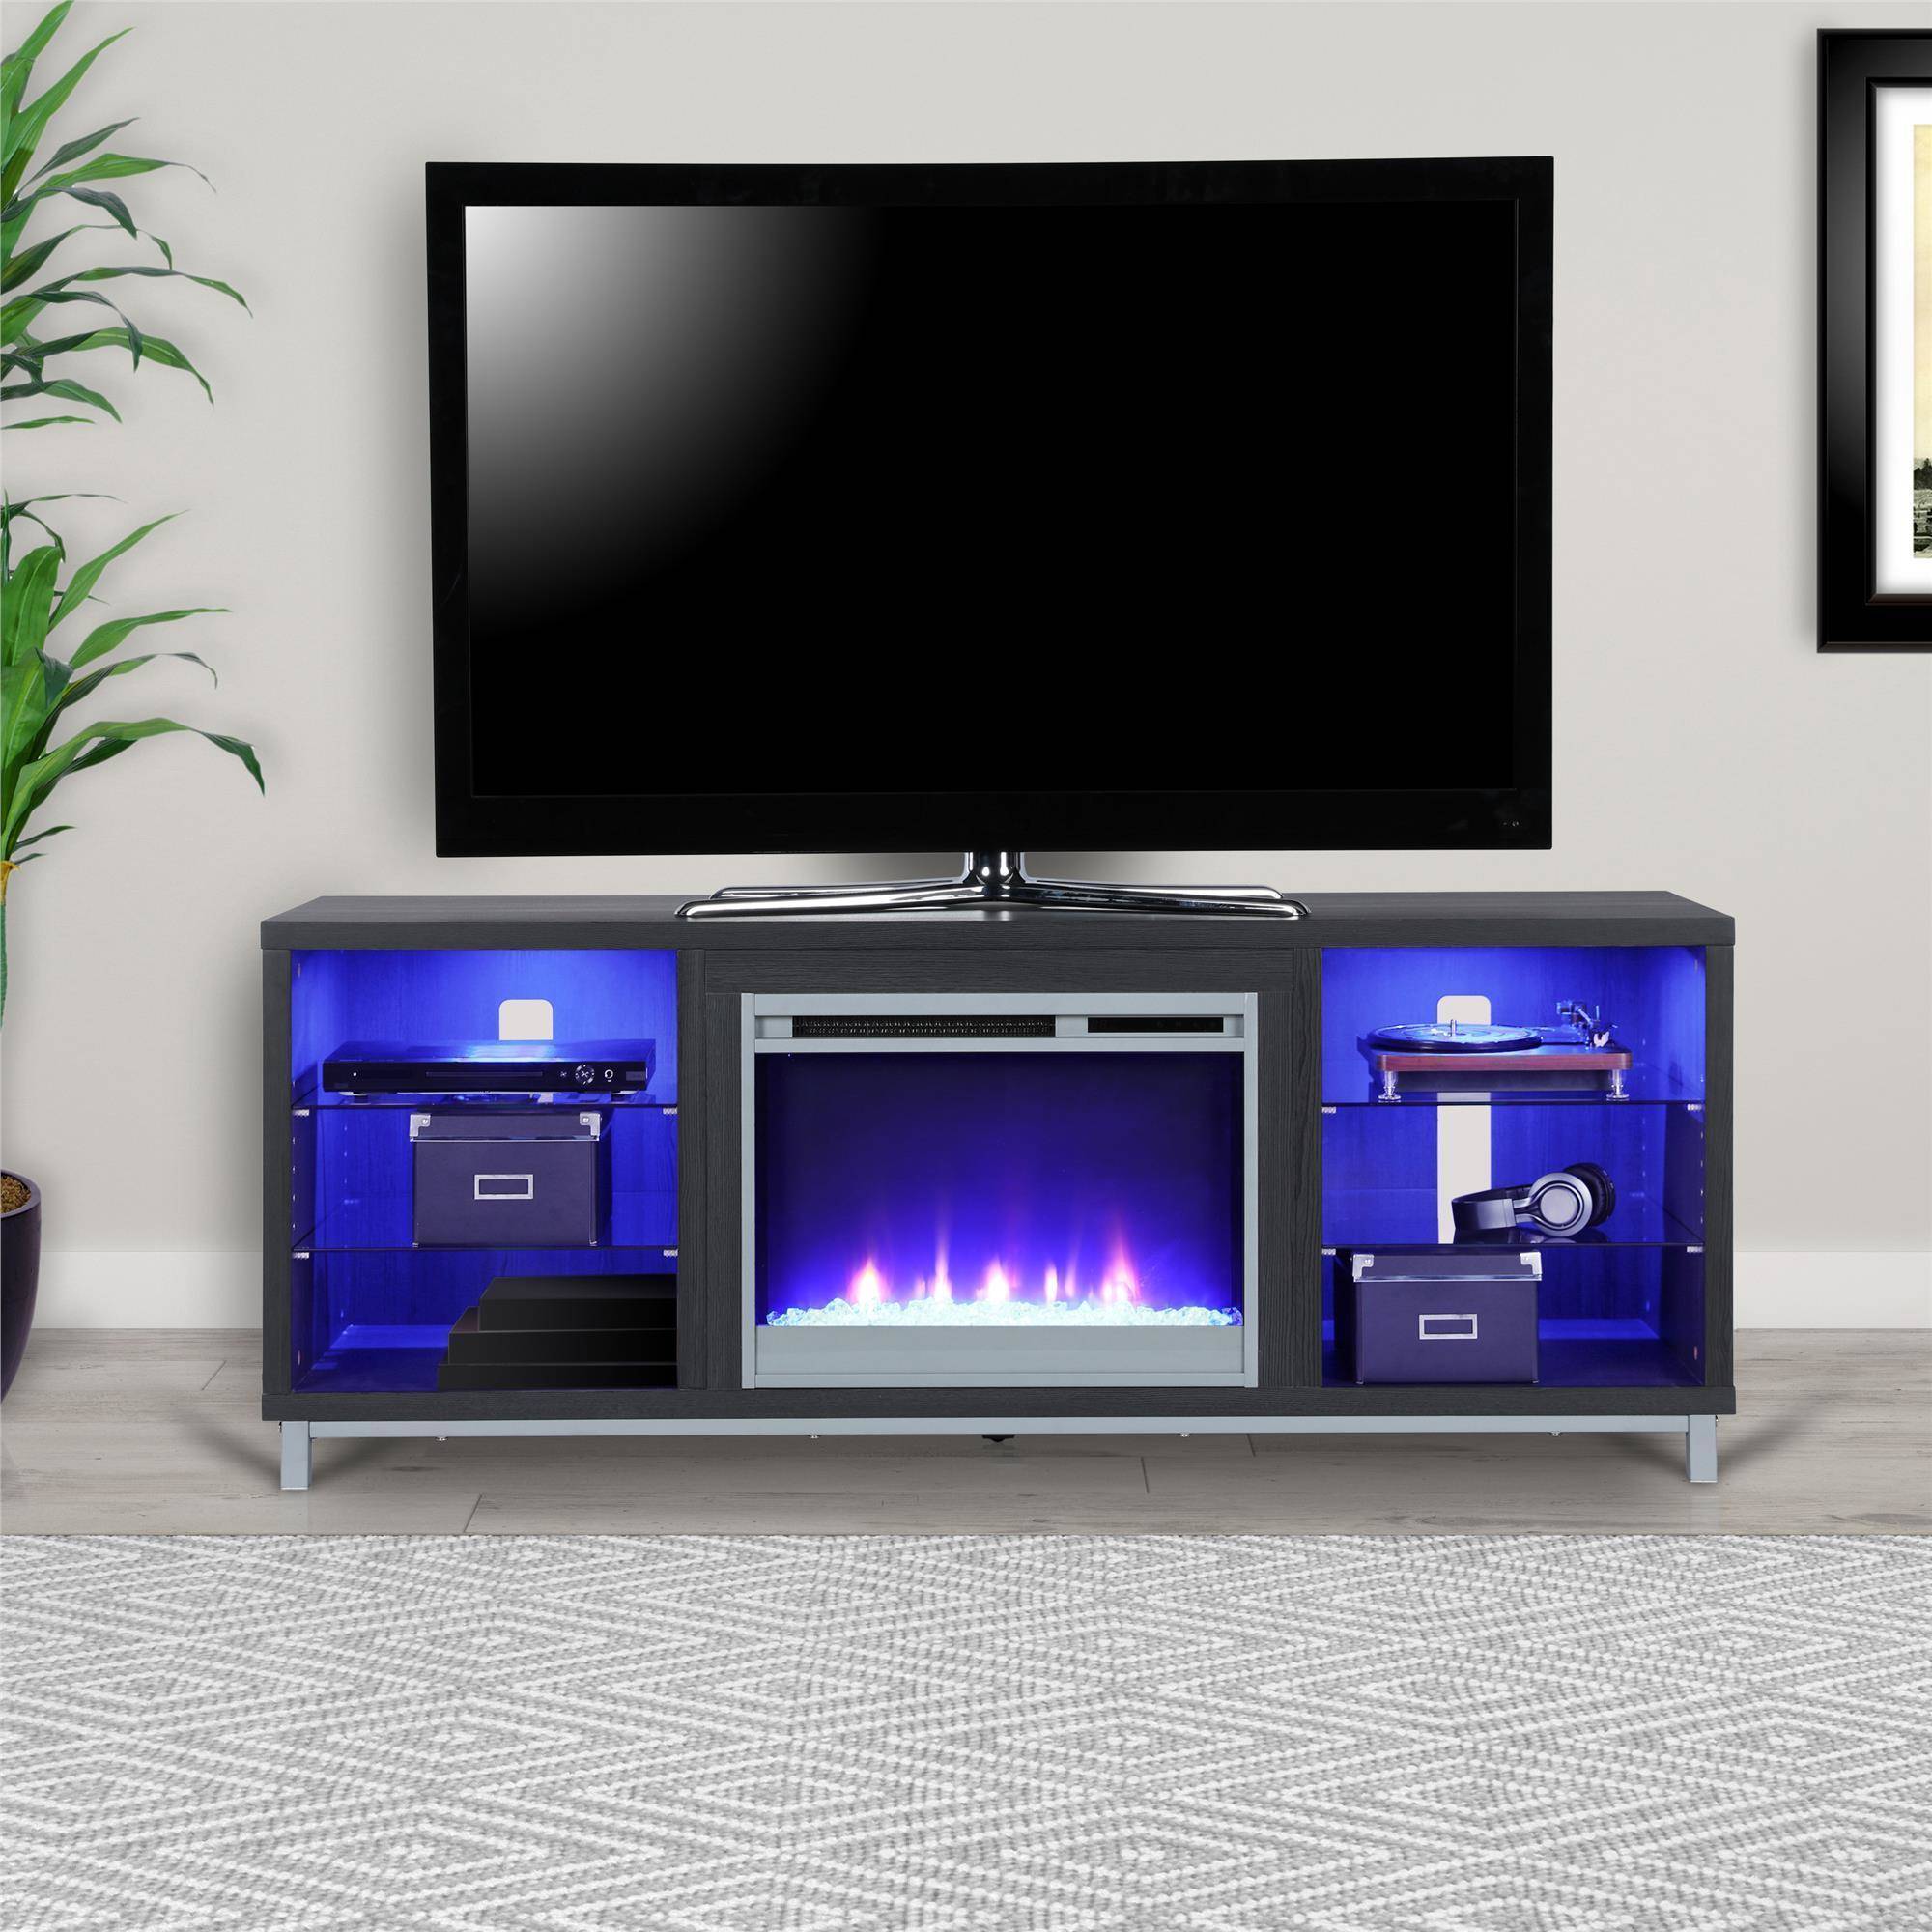 55 Inch Tv Stand with Fireplace Unique Ameriwood Home Lumina Fireplace Tv Stand for Tvs Up to 70" Wide Black Oak Walmart